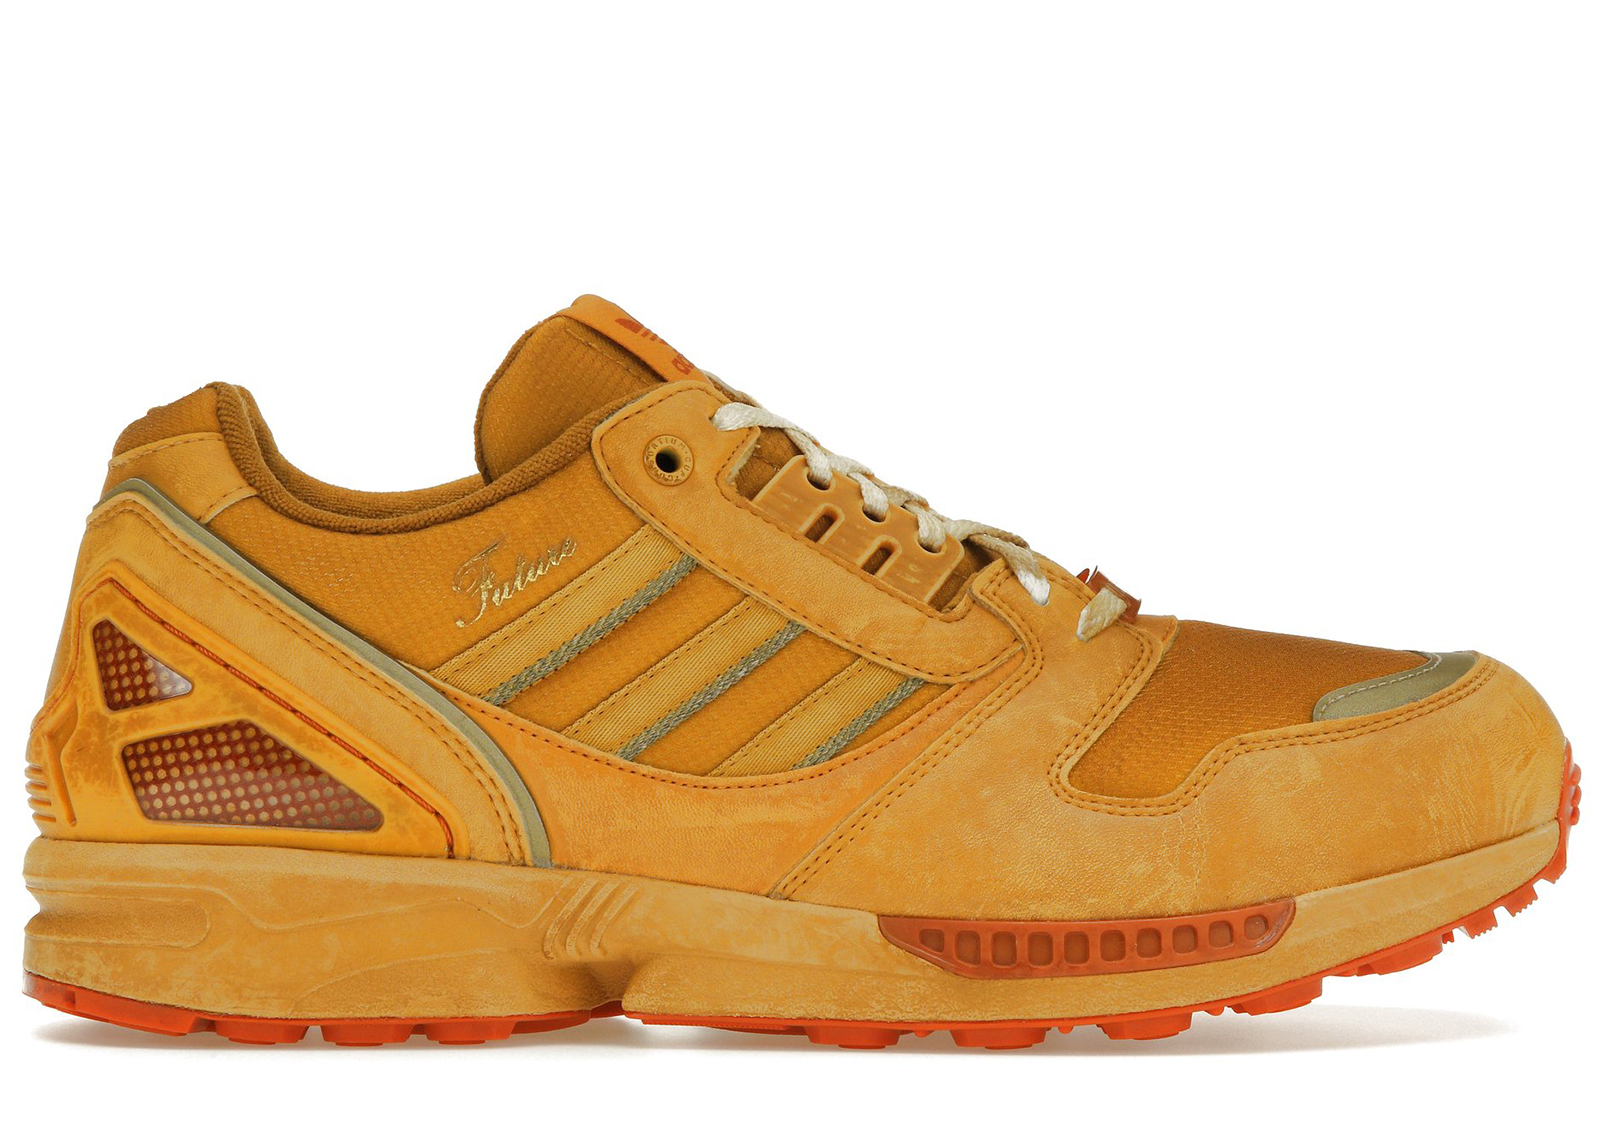 adidas ZX 8000 Consortium Cup END. Future